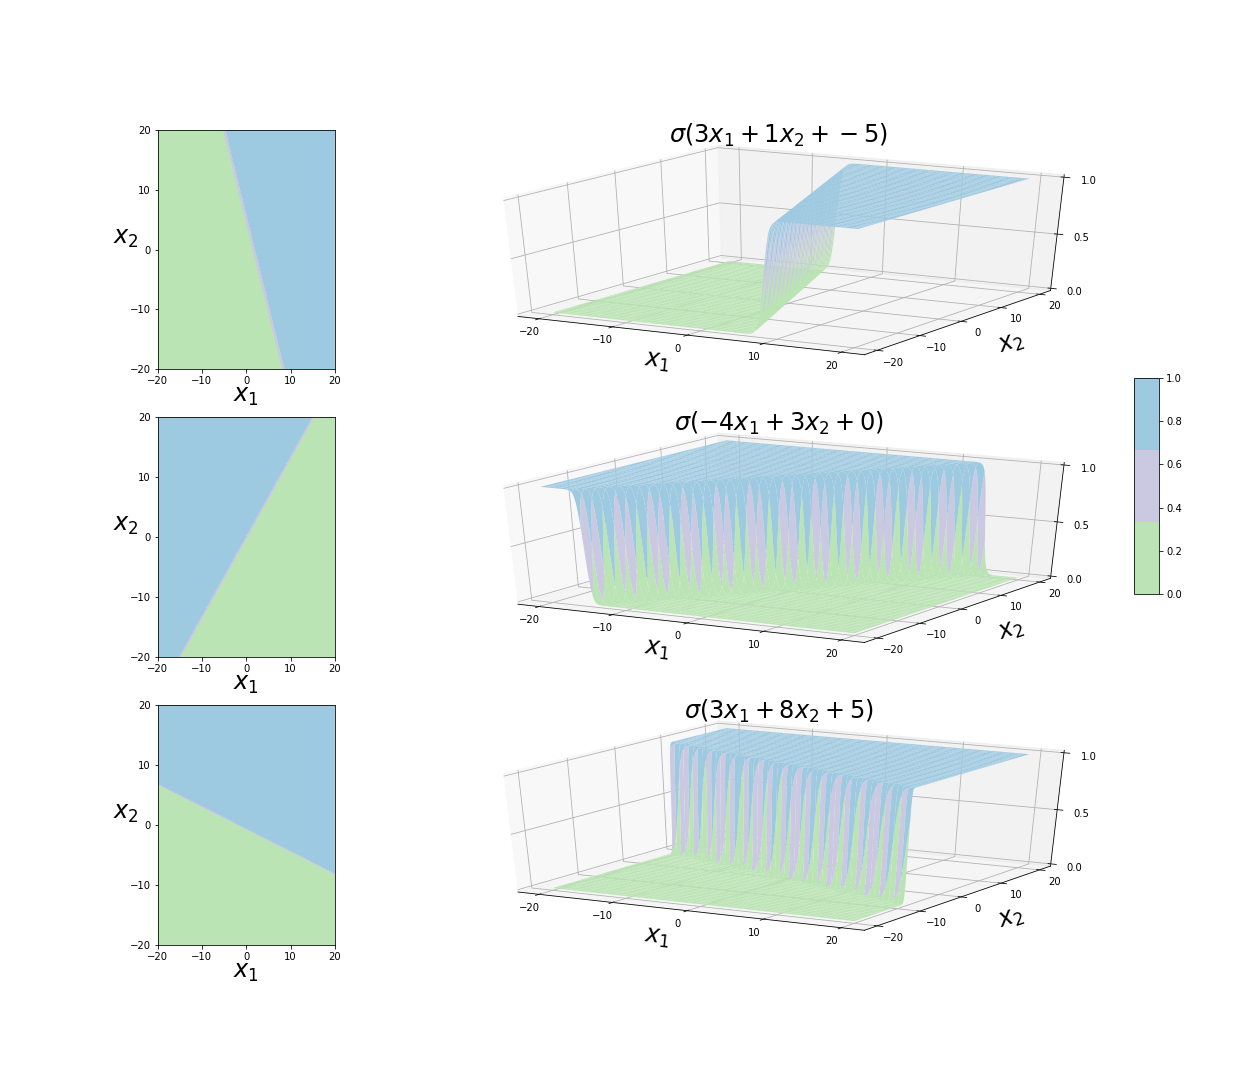 Plot of decision regions and boundary as a function of x in a 2-dimensional case